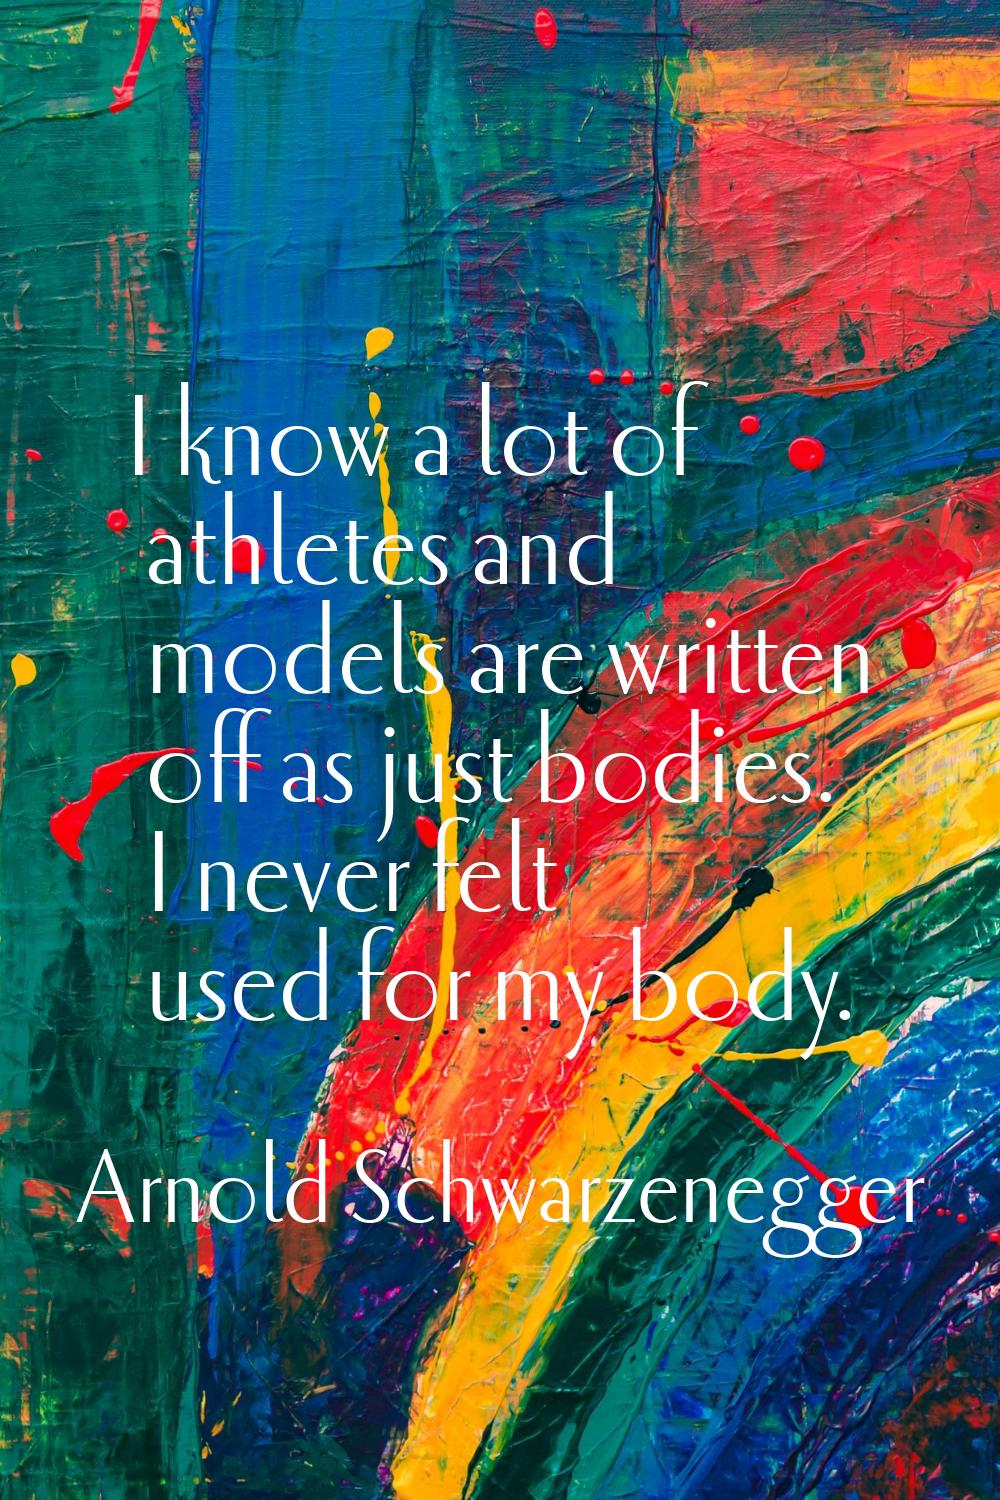 I know a lot of athletes and models are written off as just bodies. I never felt used for my body.